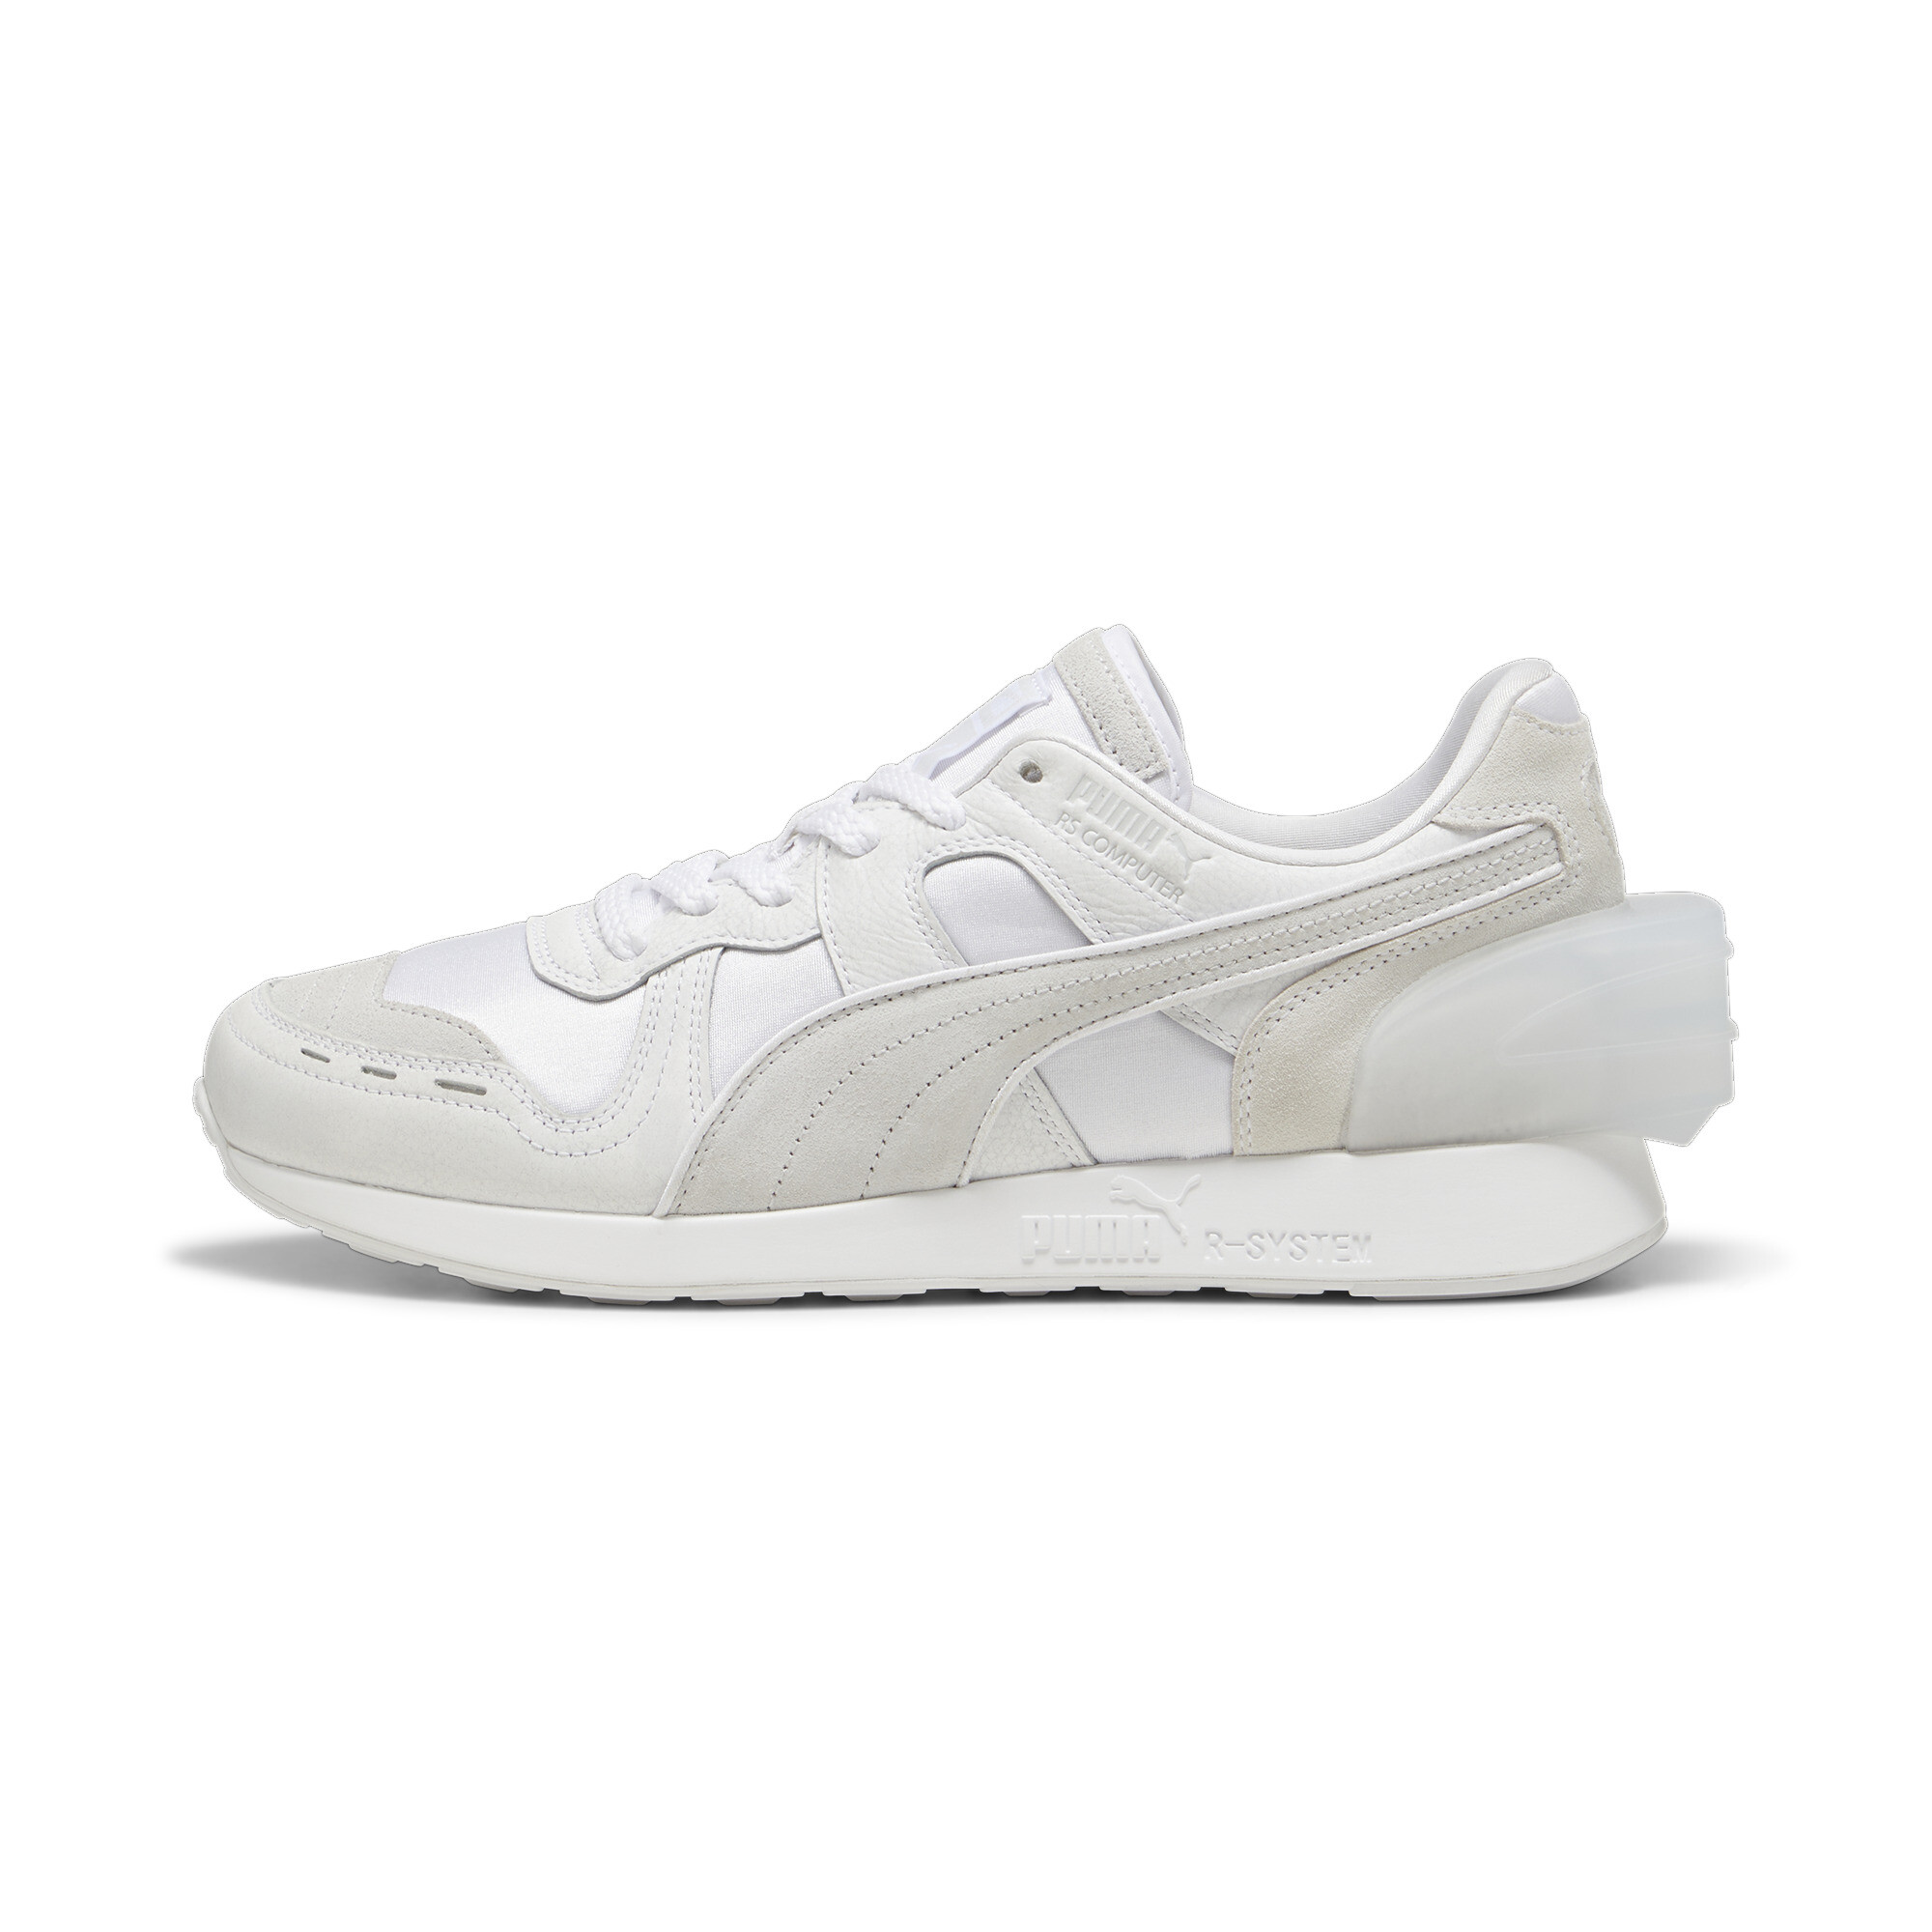 Puma RS-100 40th Anniversary Sneakers, White, Size 35.5, Shoes